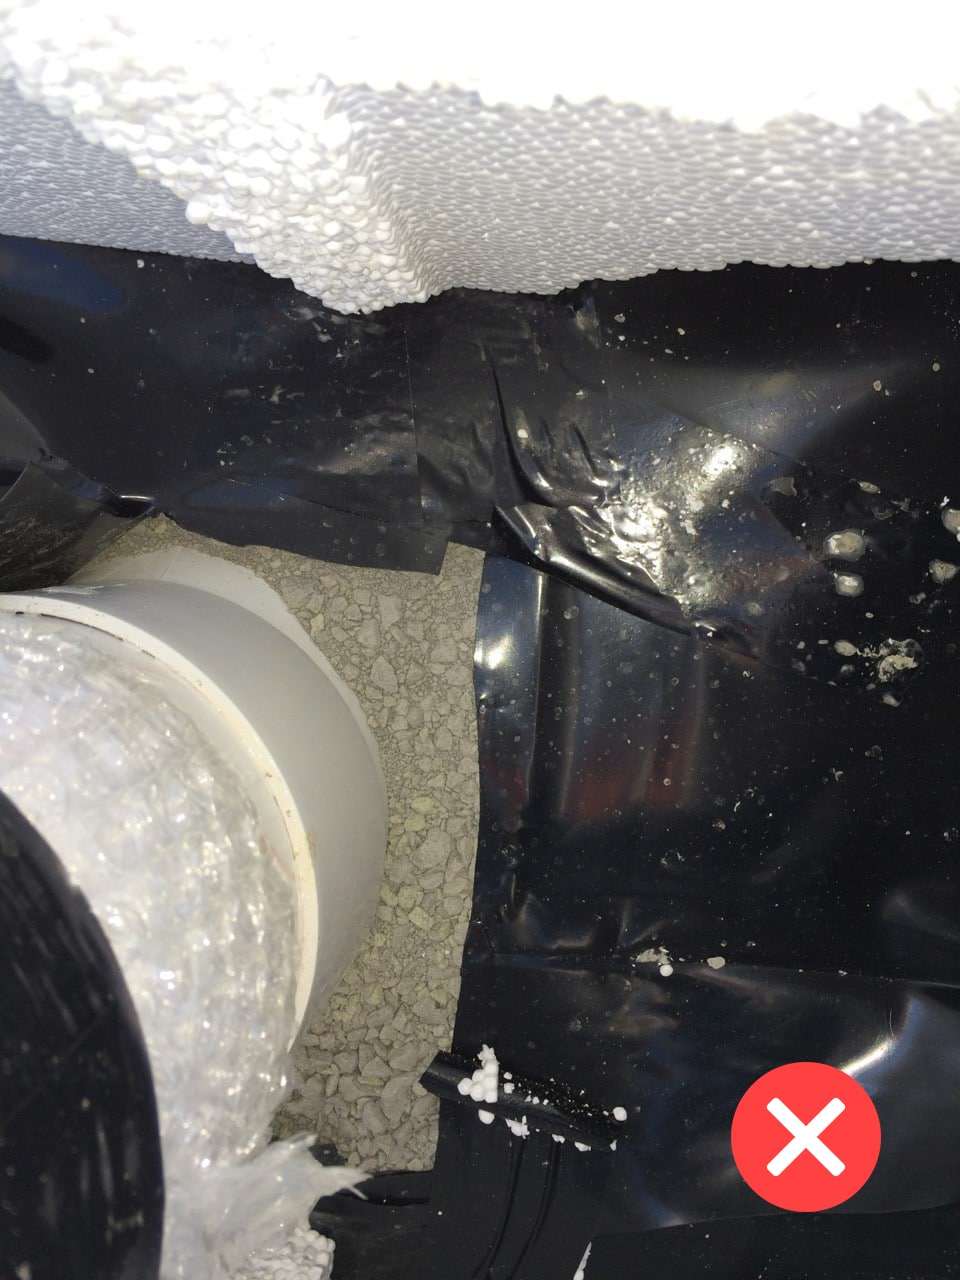 D.P.M. cut too short showing the GAP - Poor installation of membranes around service ducts.